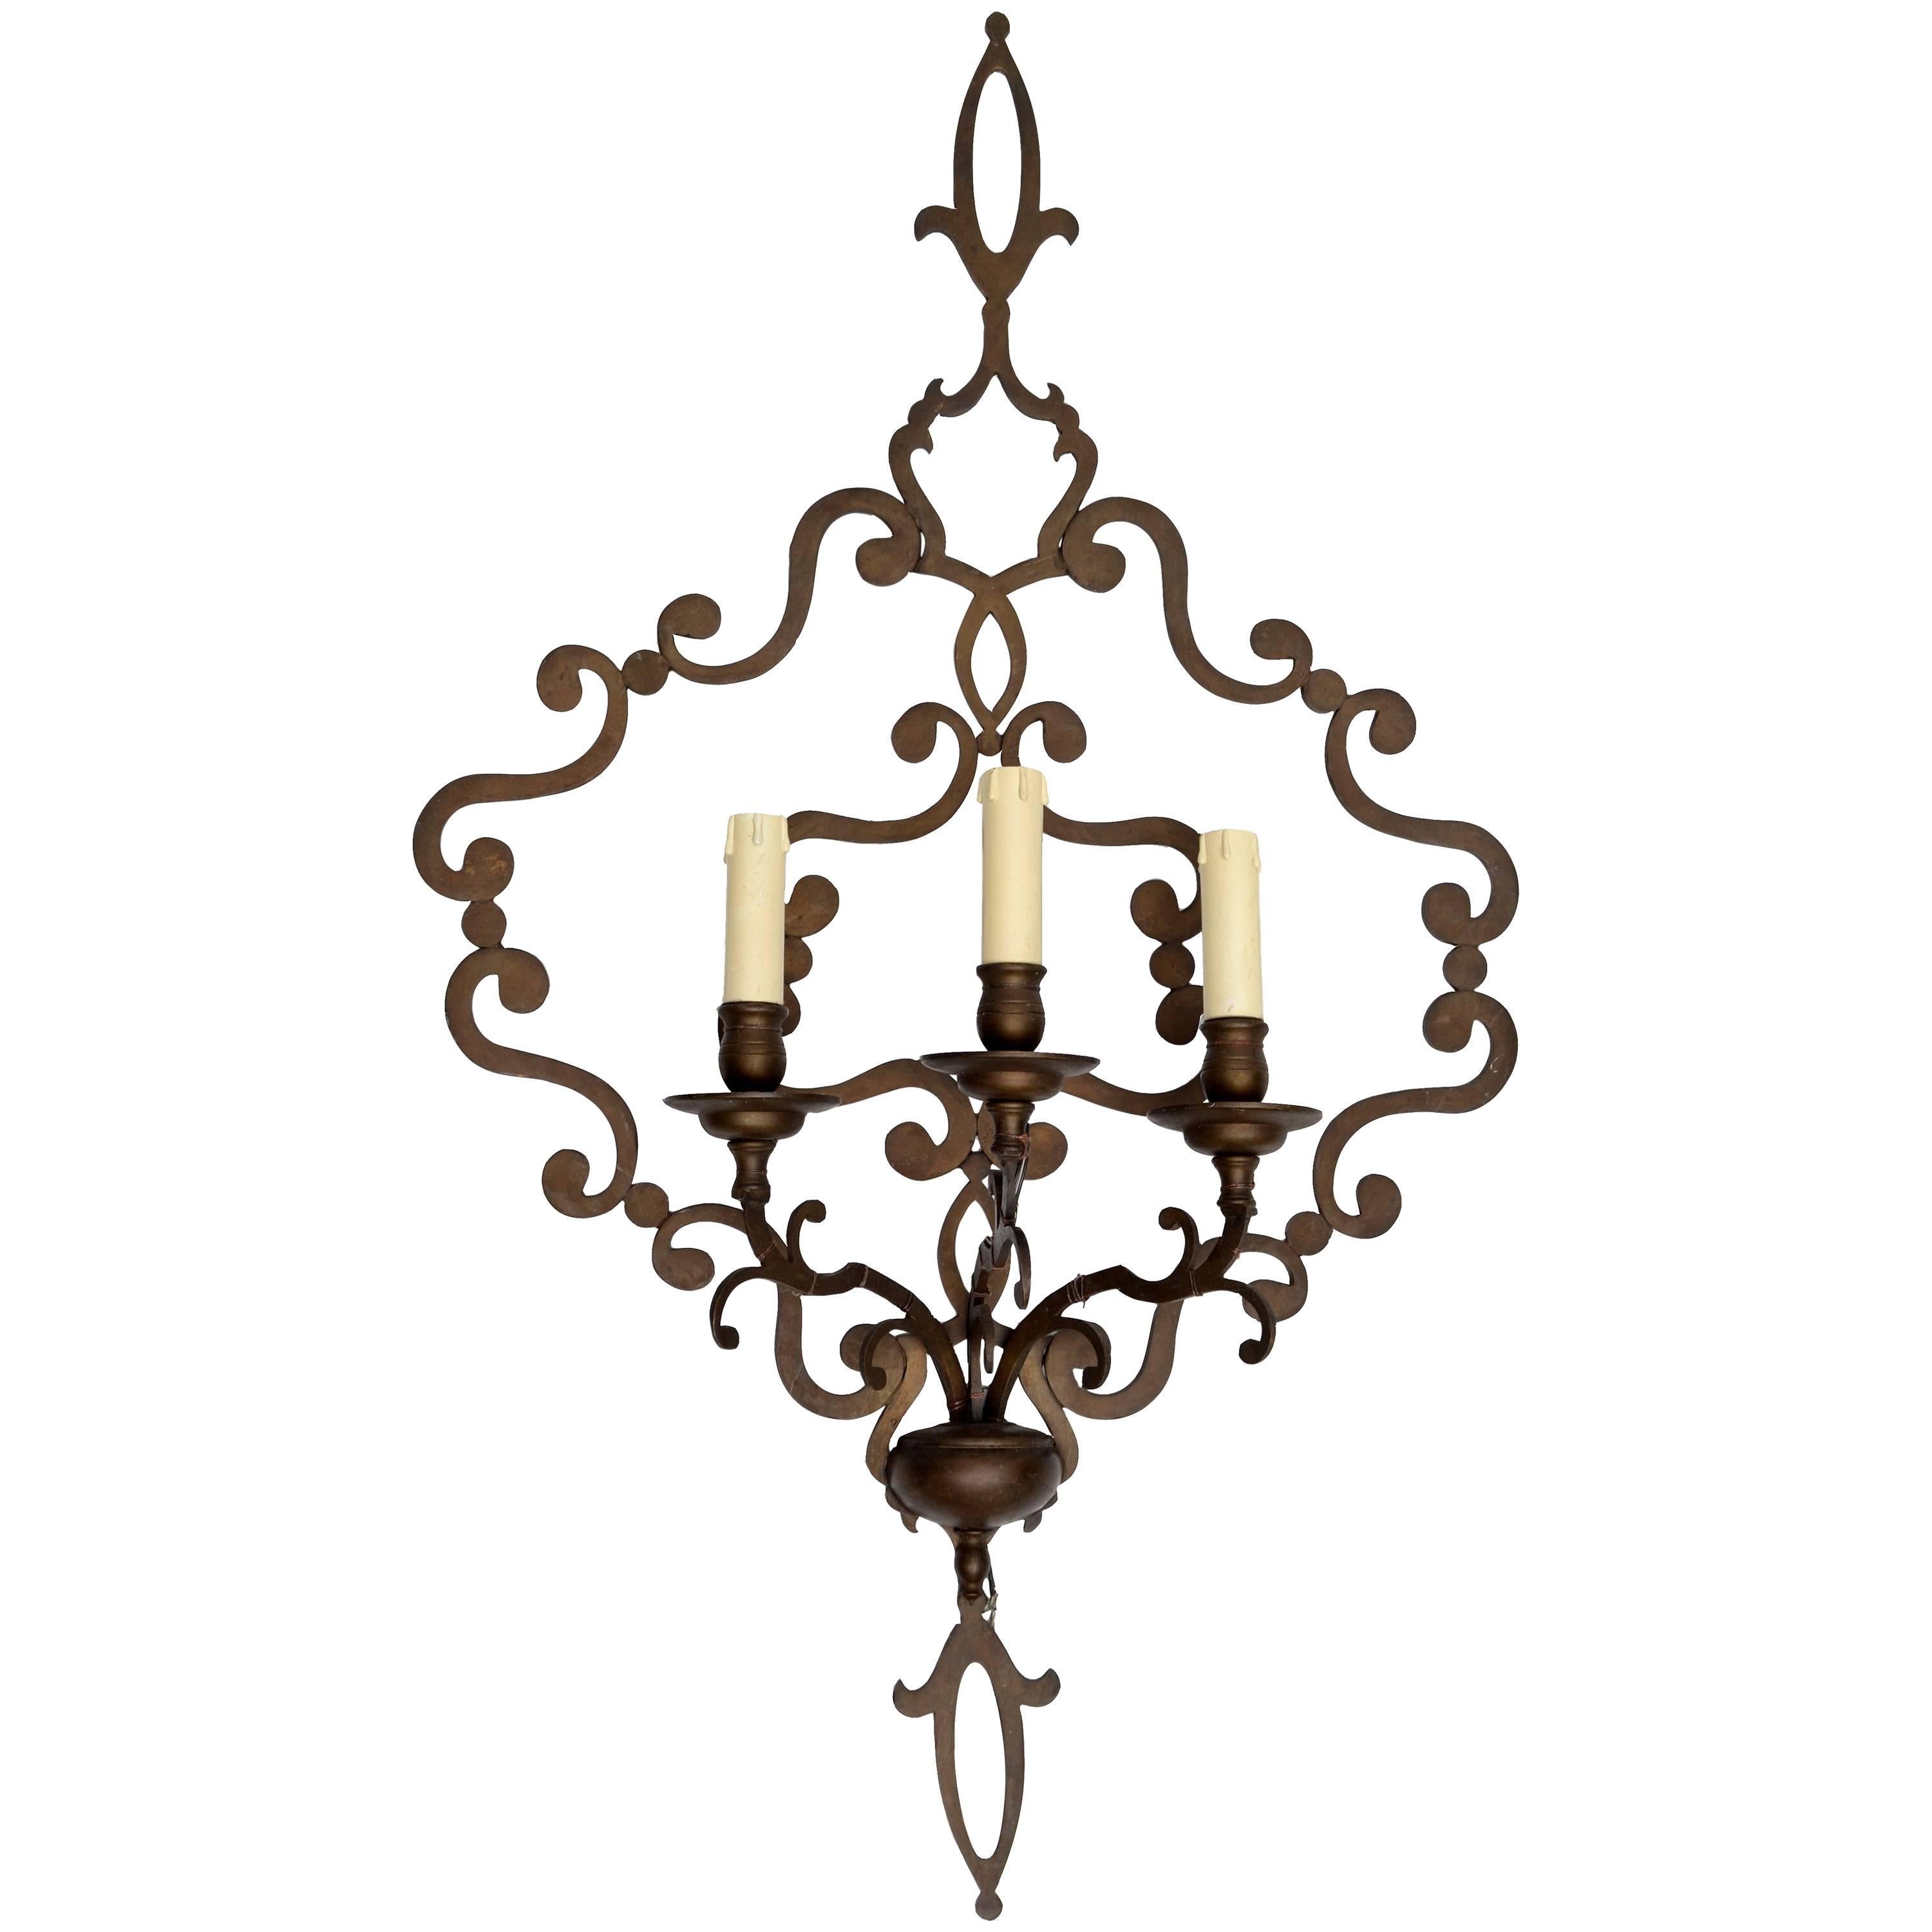 1940s Italian Neoclassical Wrought Iron Applique 3 Light Wall Sconce  For Sale